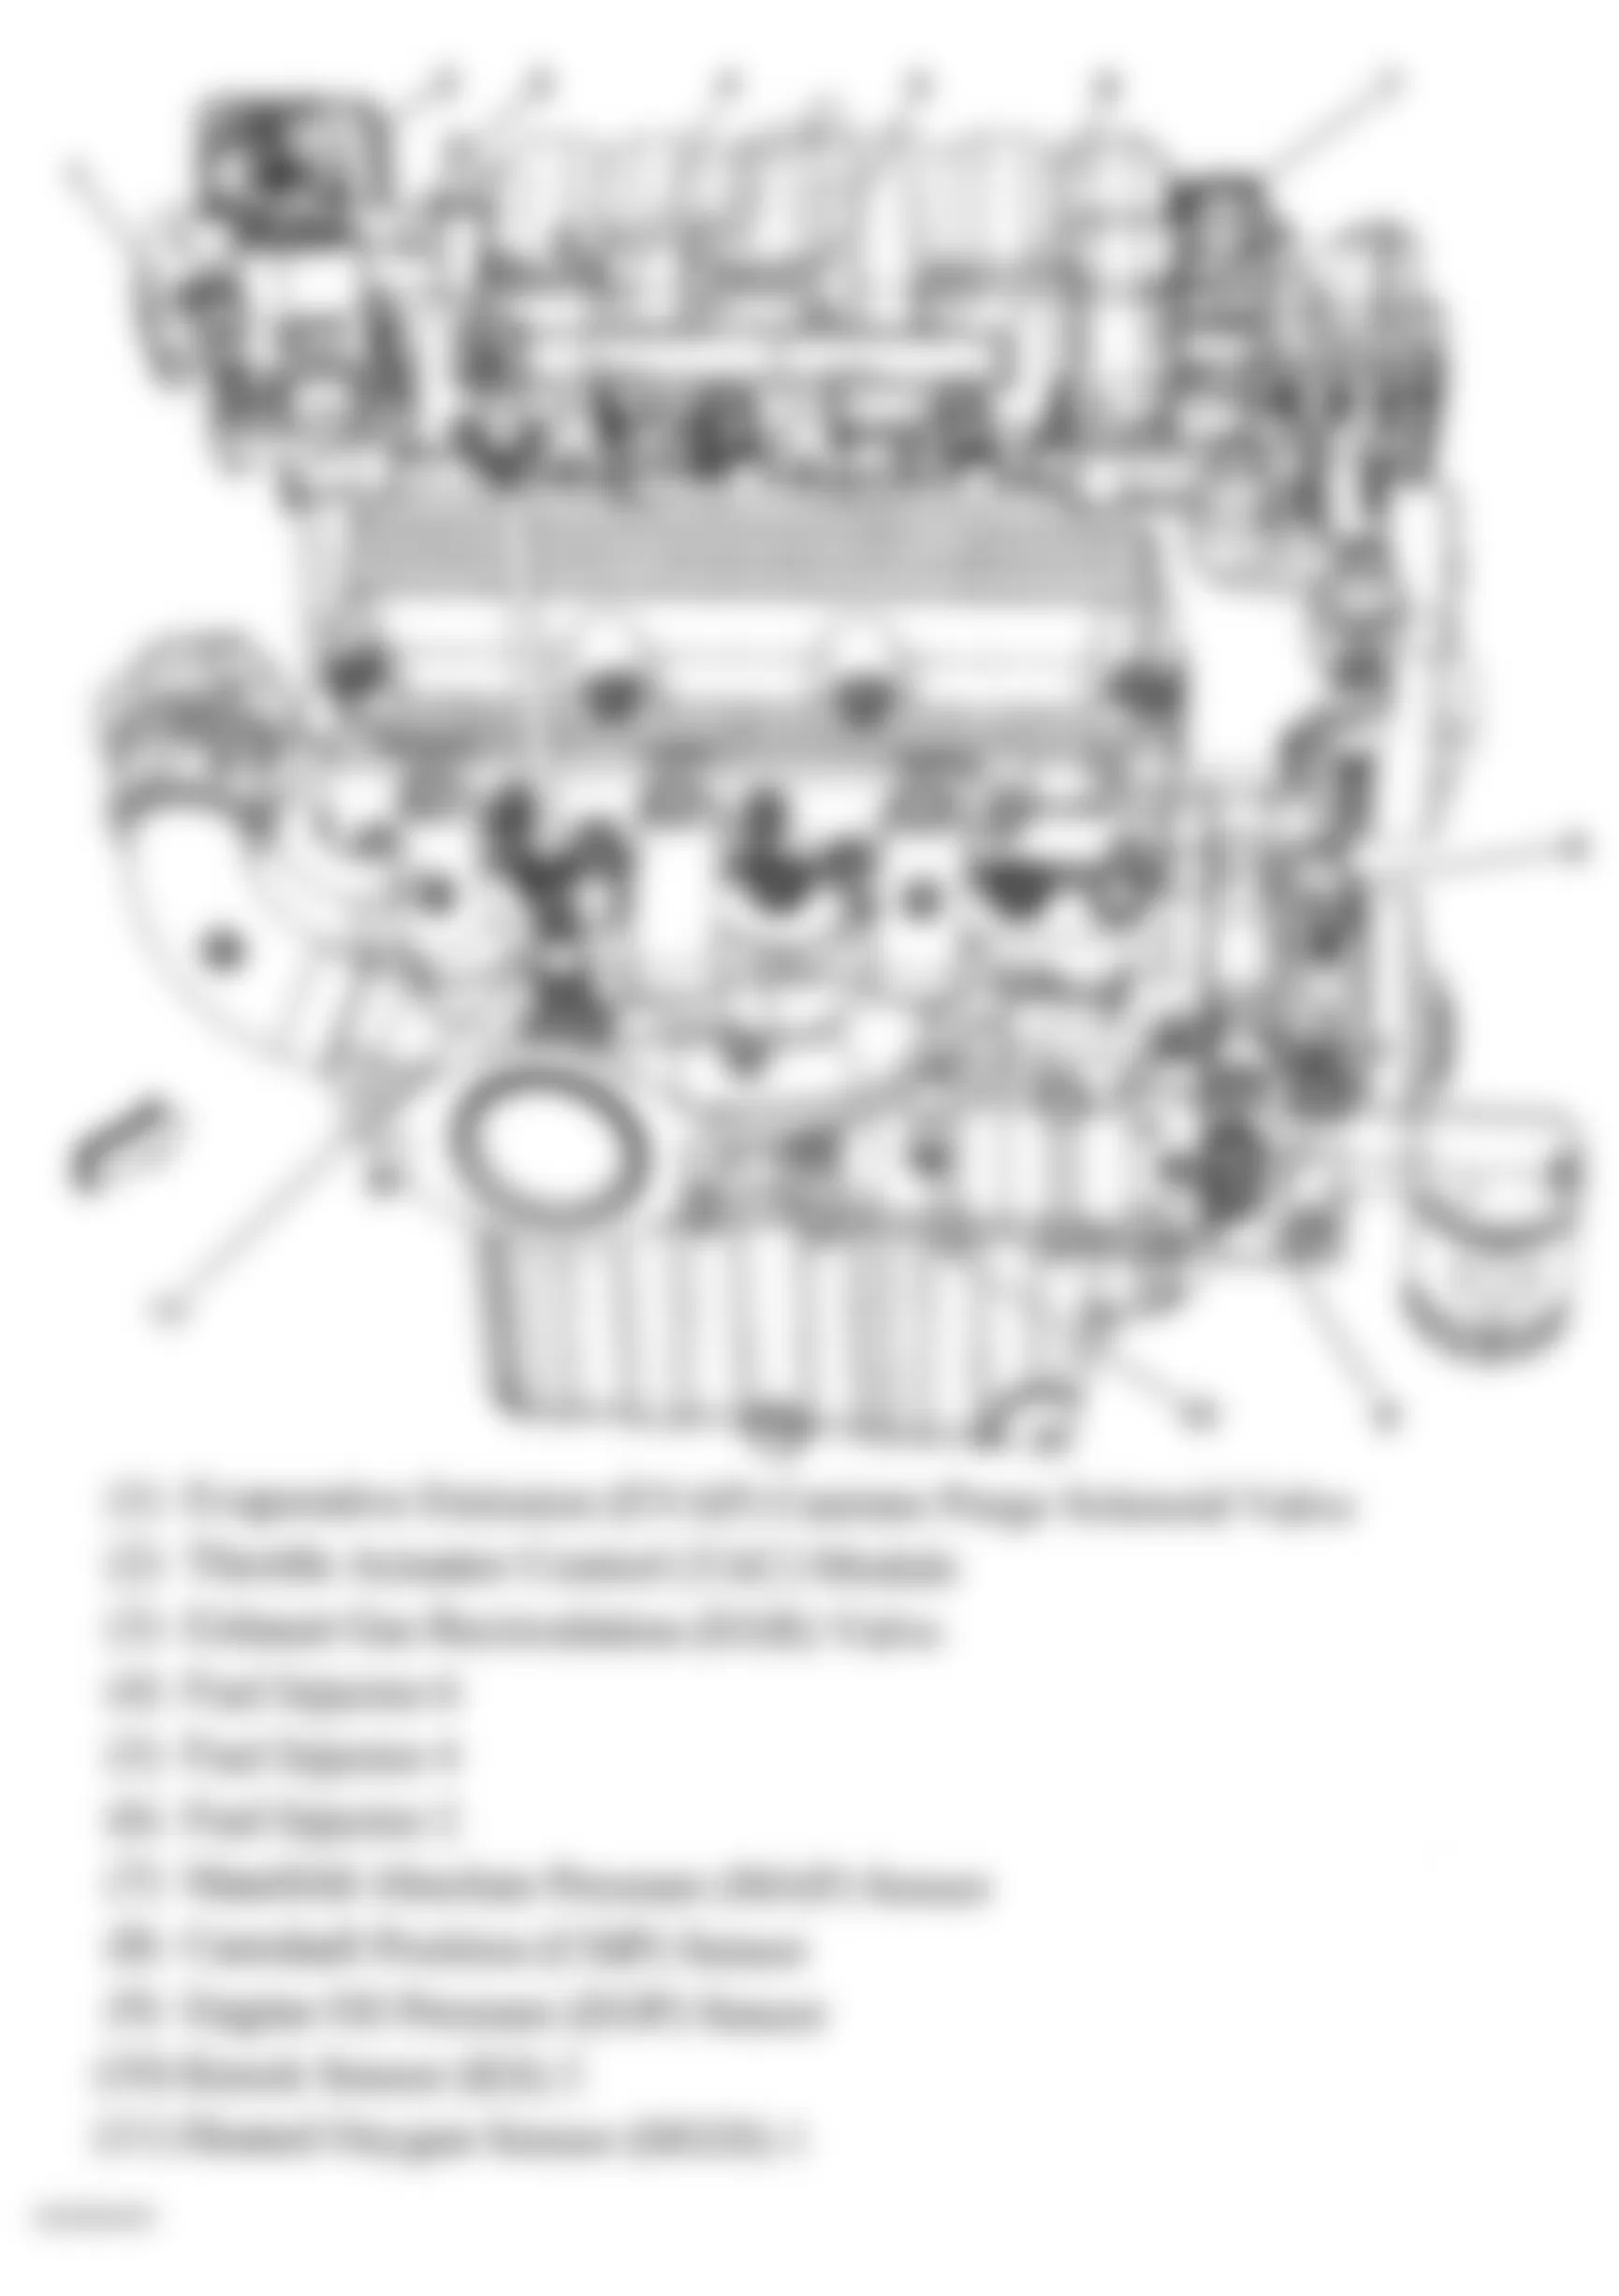 Buick Allure CX 2008 - Component Locations -  Right Side Of Engine (3.8L)